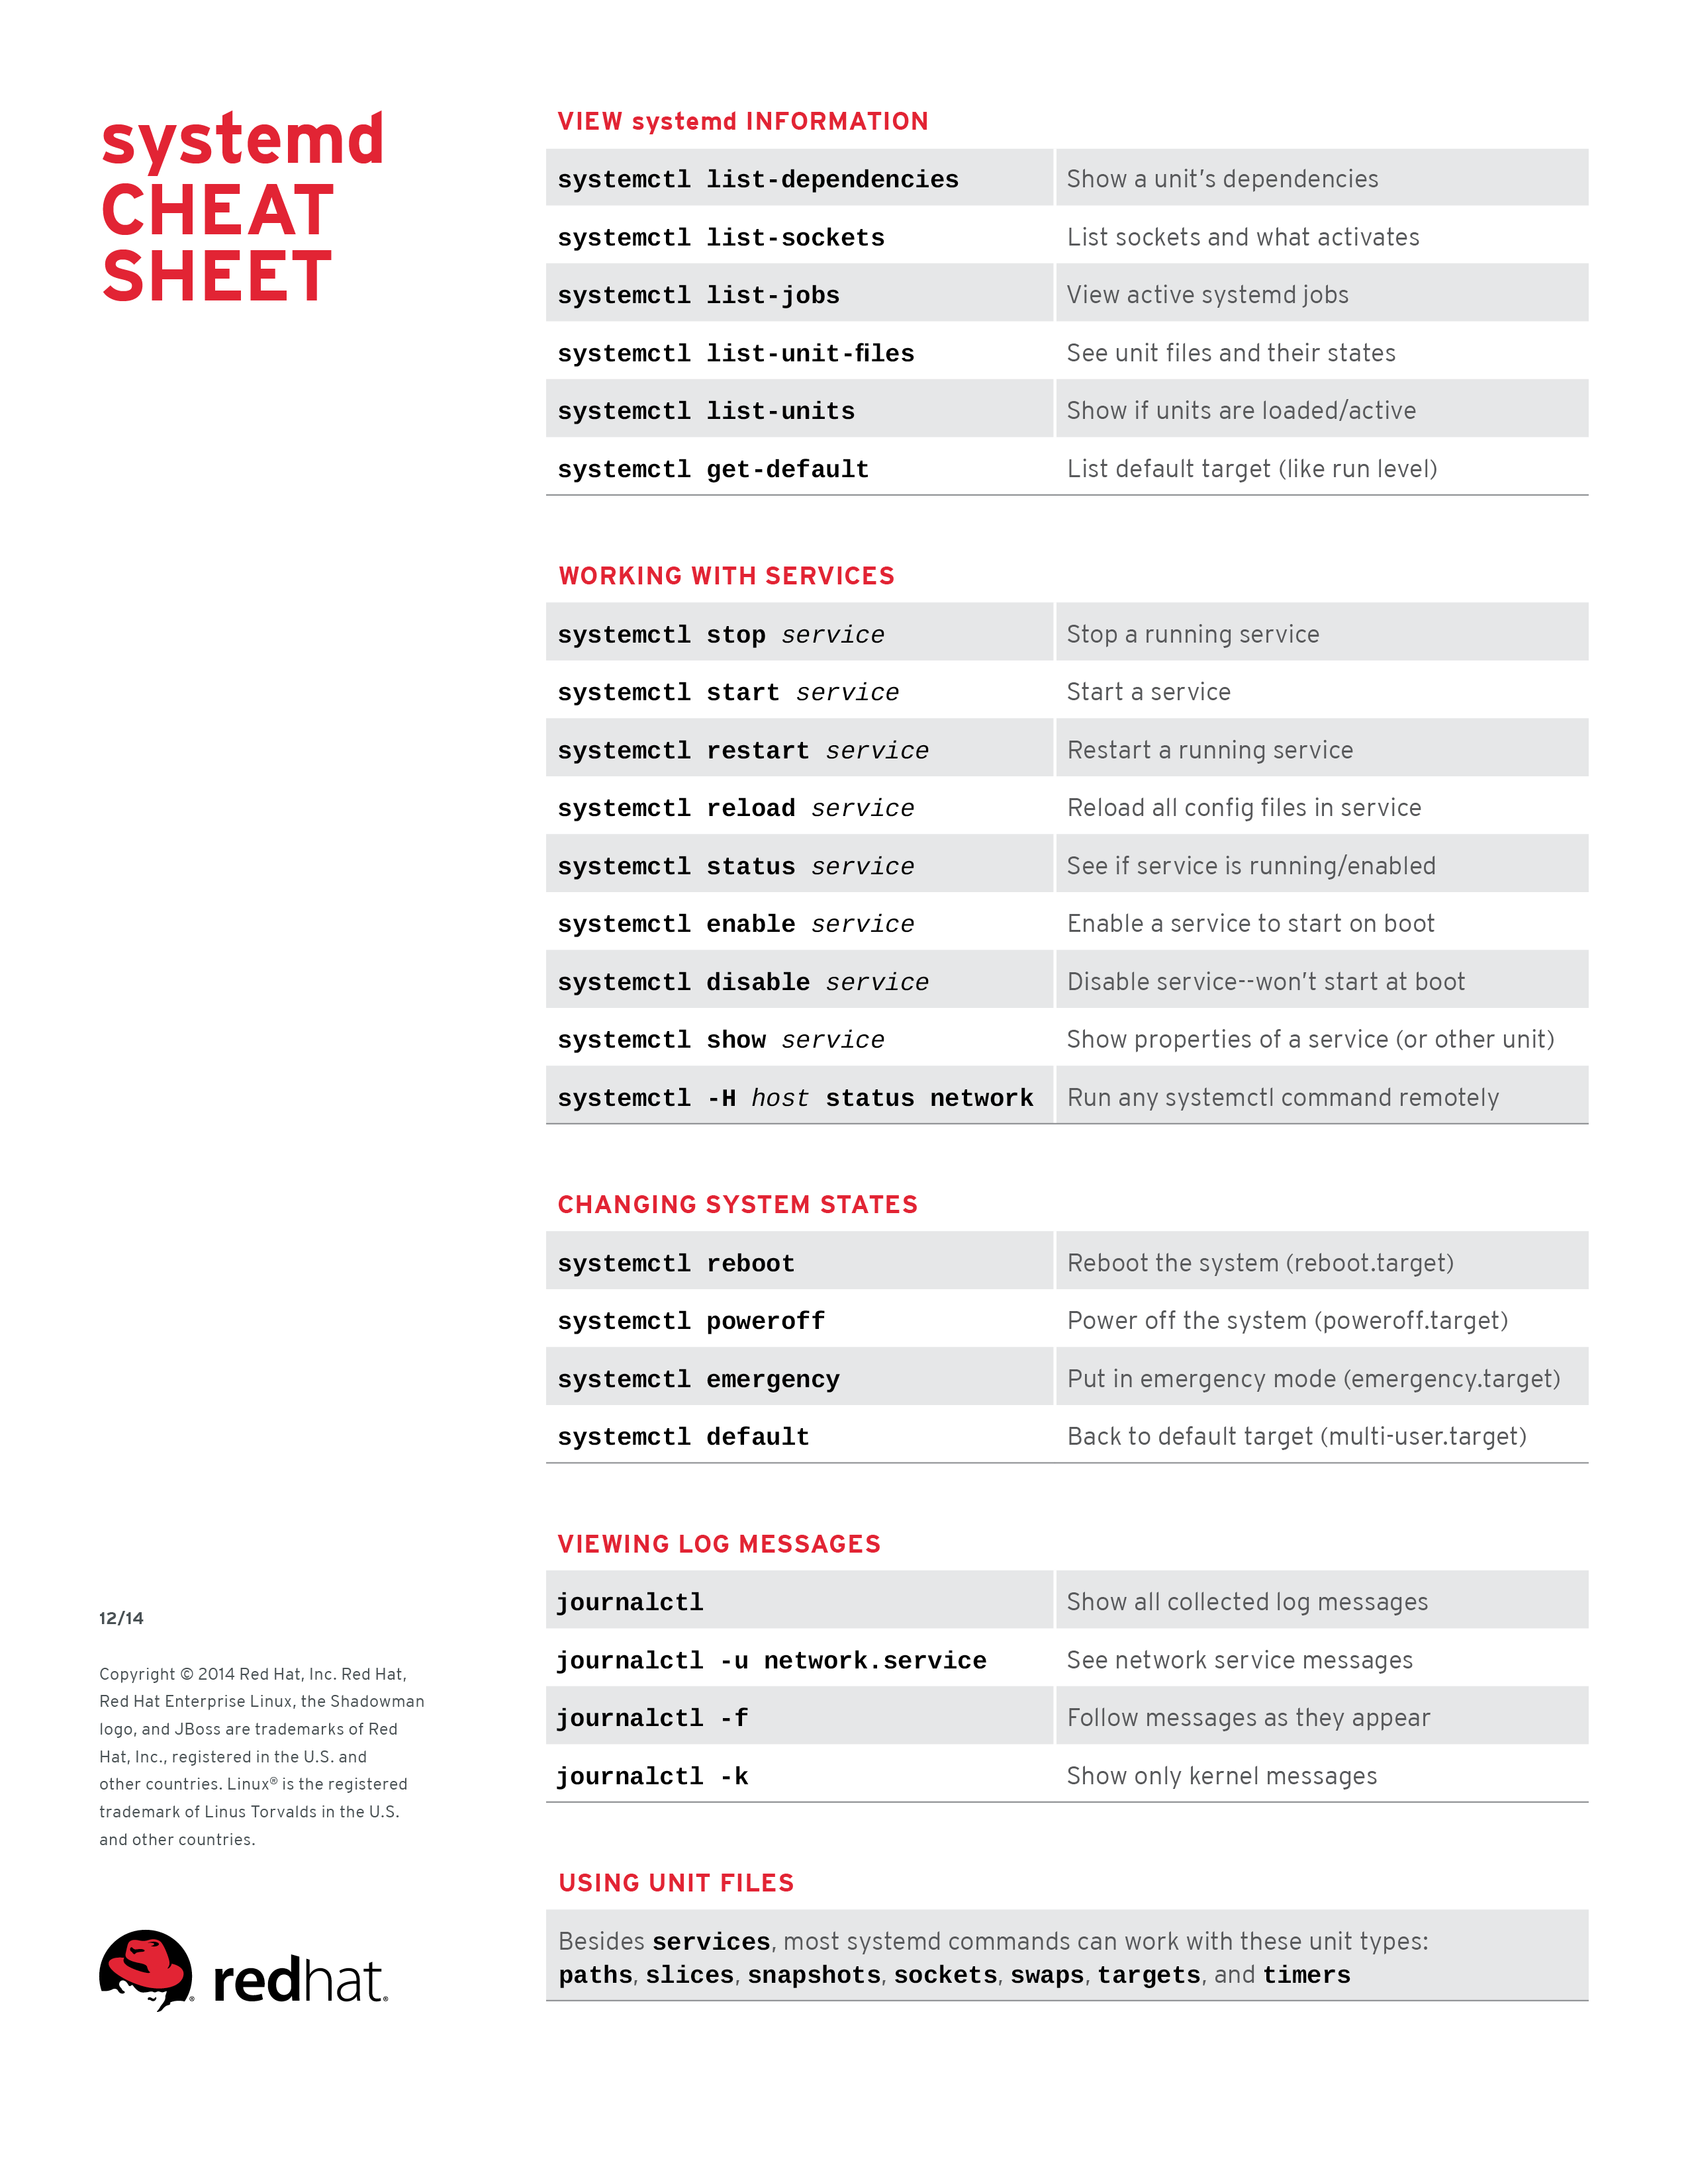 systemd Cheat Sheet for Red Hat Enterprise Linux 7 - Red Hat Customer ...